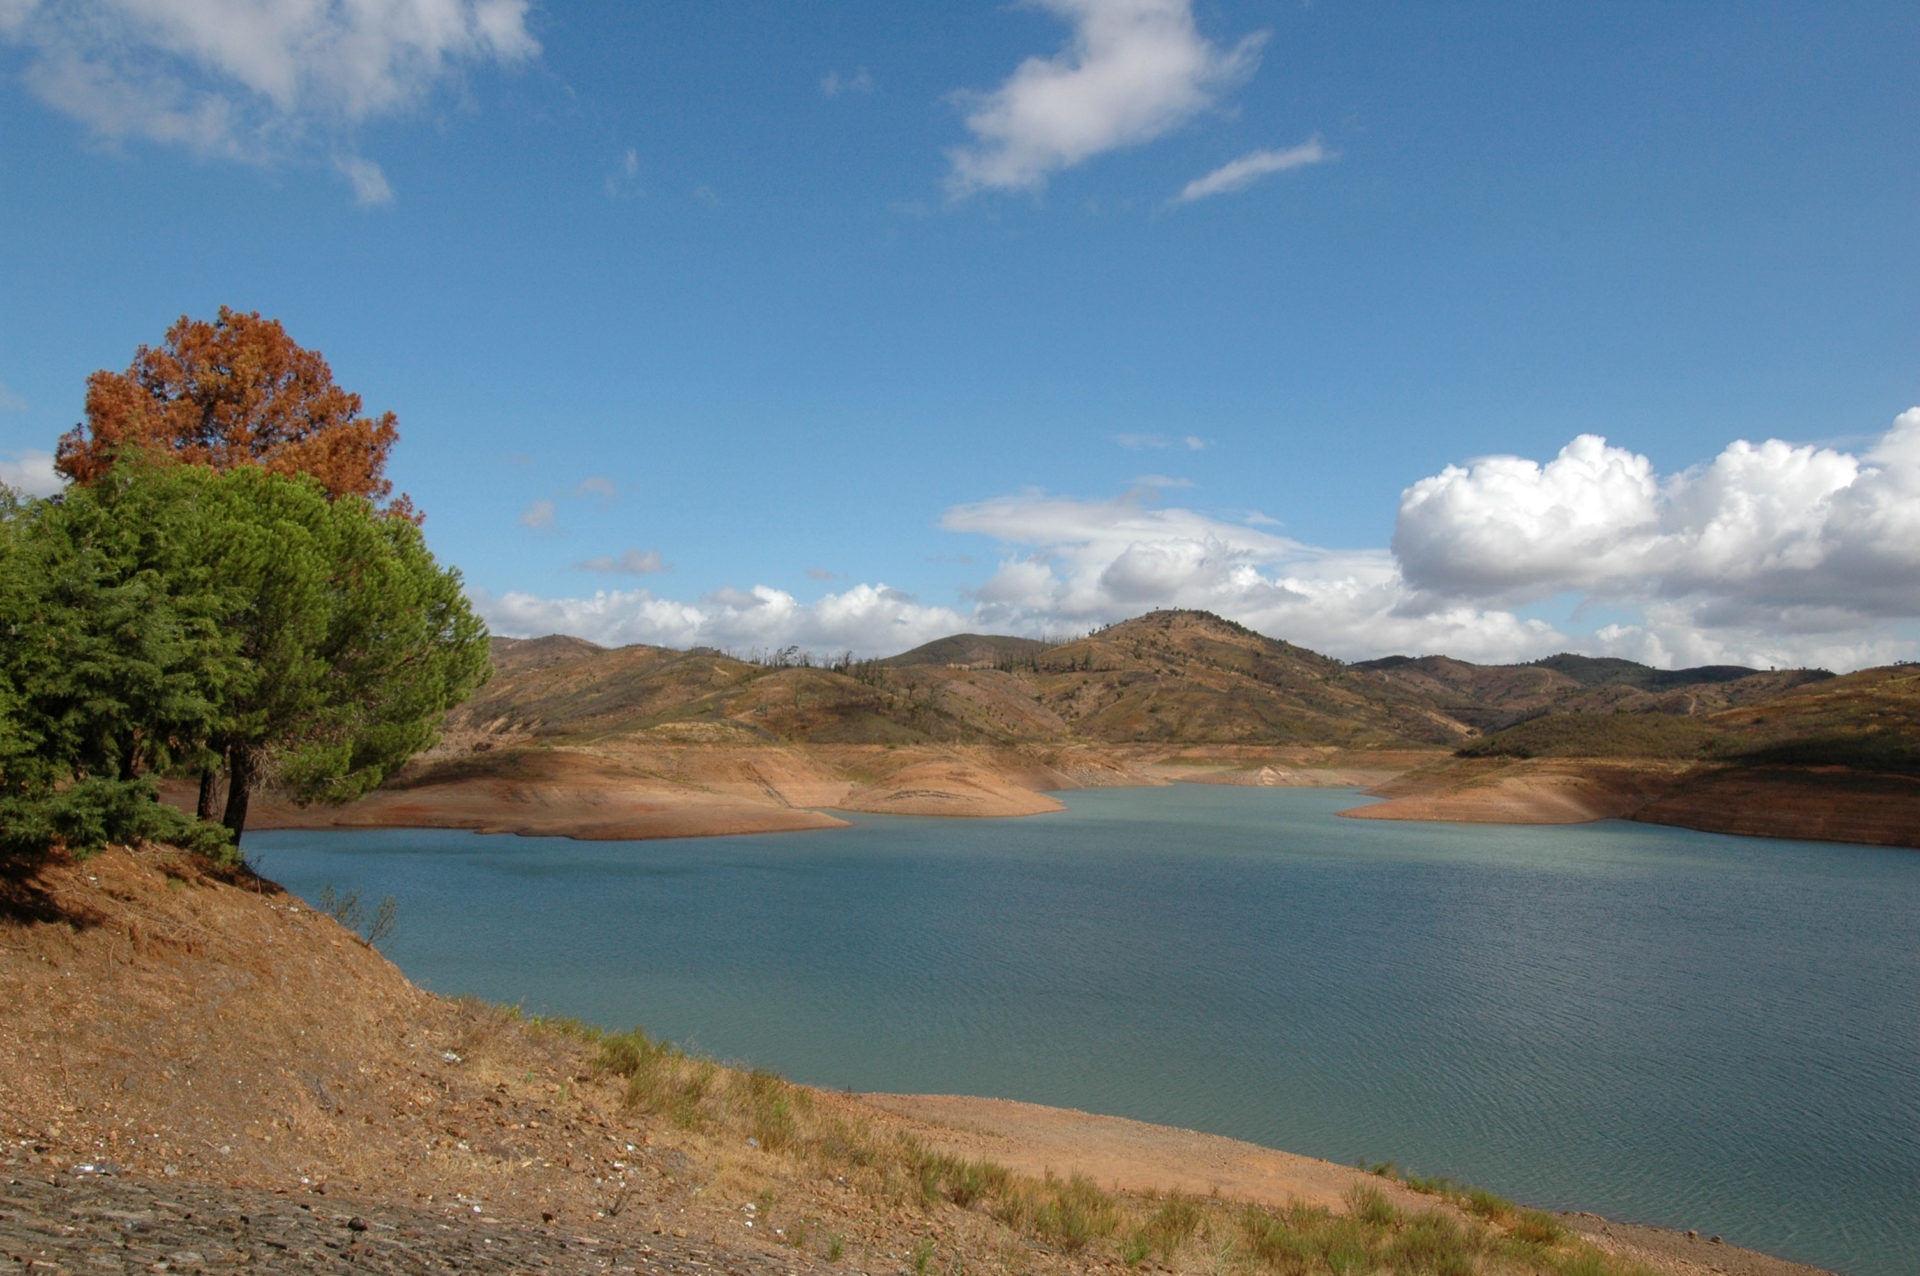 A view of the area around the Arade dam in Portugal in 2013